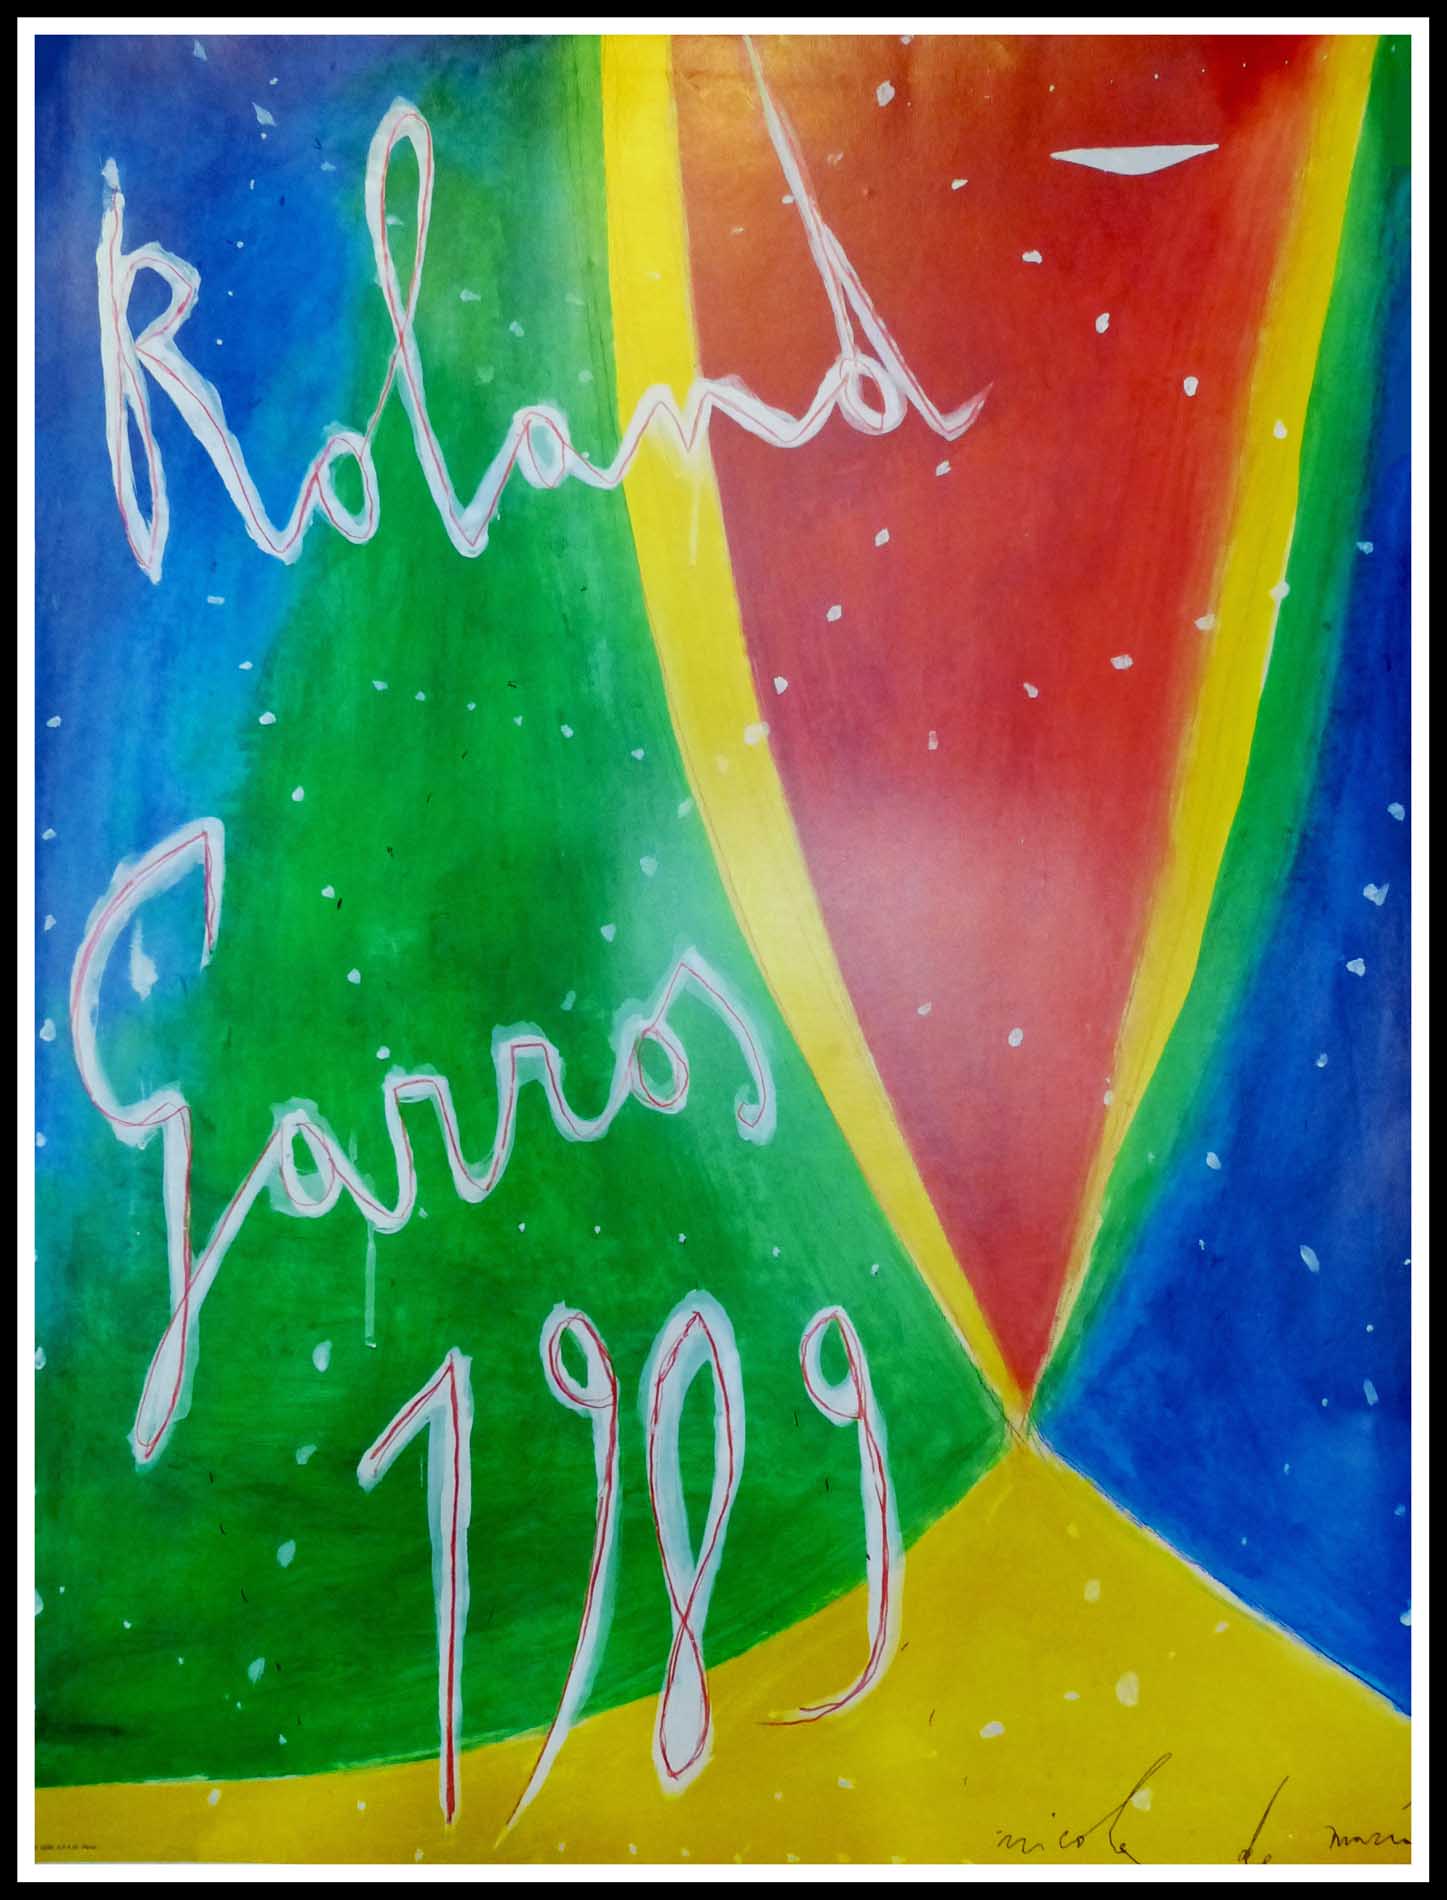 (alt="Original vintage sport poster, Roland Garros 1989 signed in the plate by Nicola de Maria and printed by FFT")